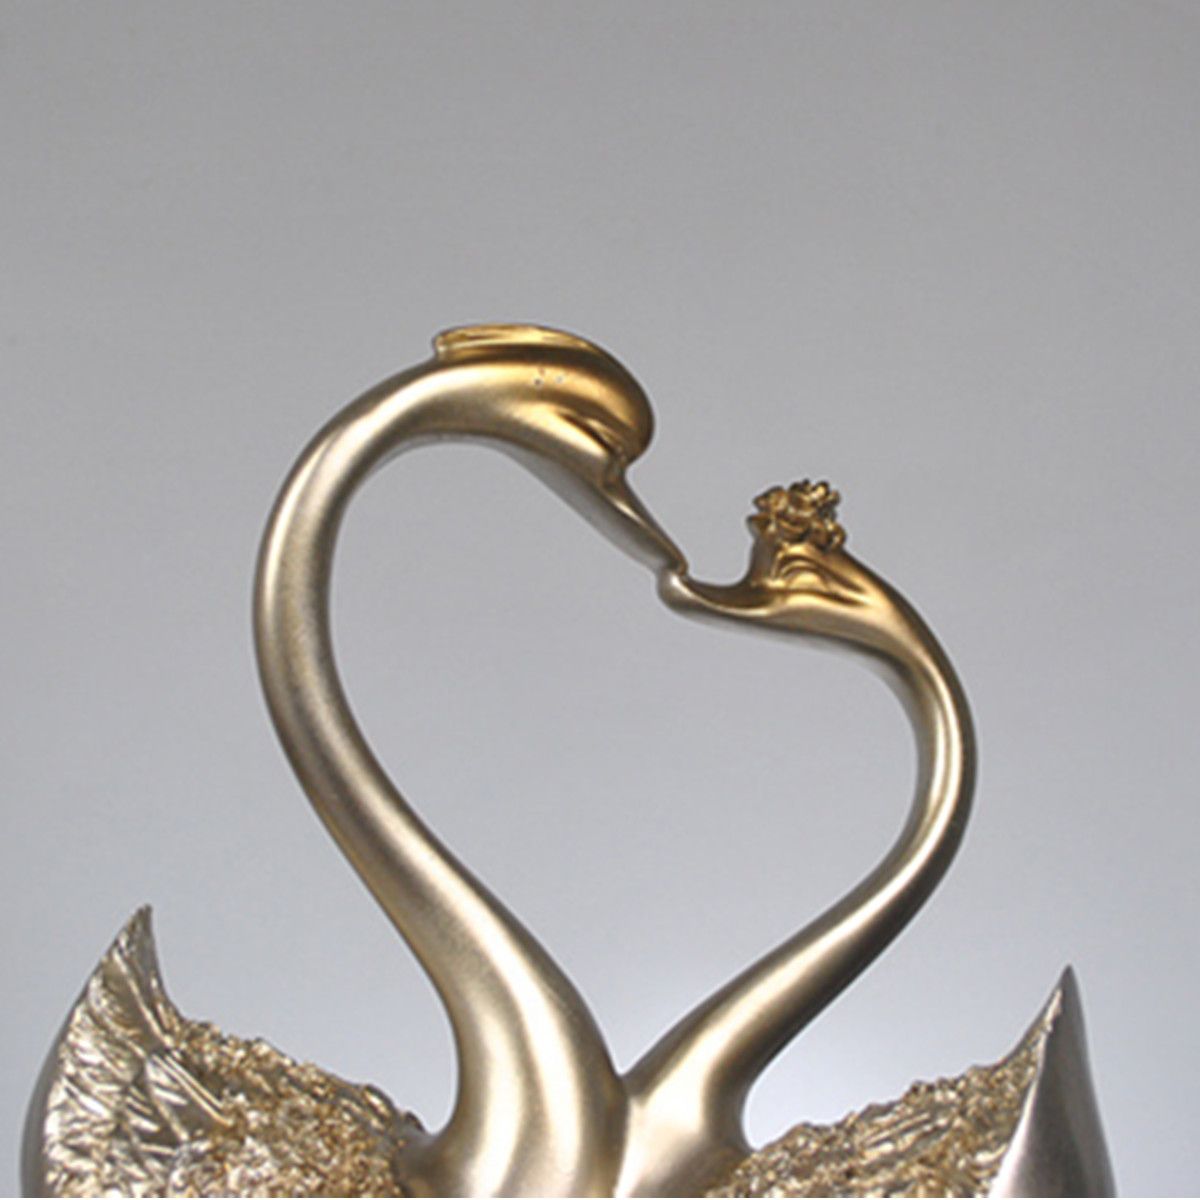 Modern-Couples-Swan-Resin-statue-Craft-Home-Wedding-Ornament-Cabinet-Decorations-1461261